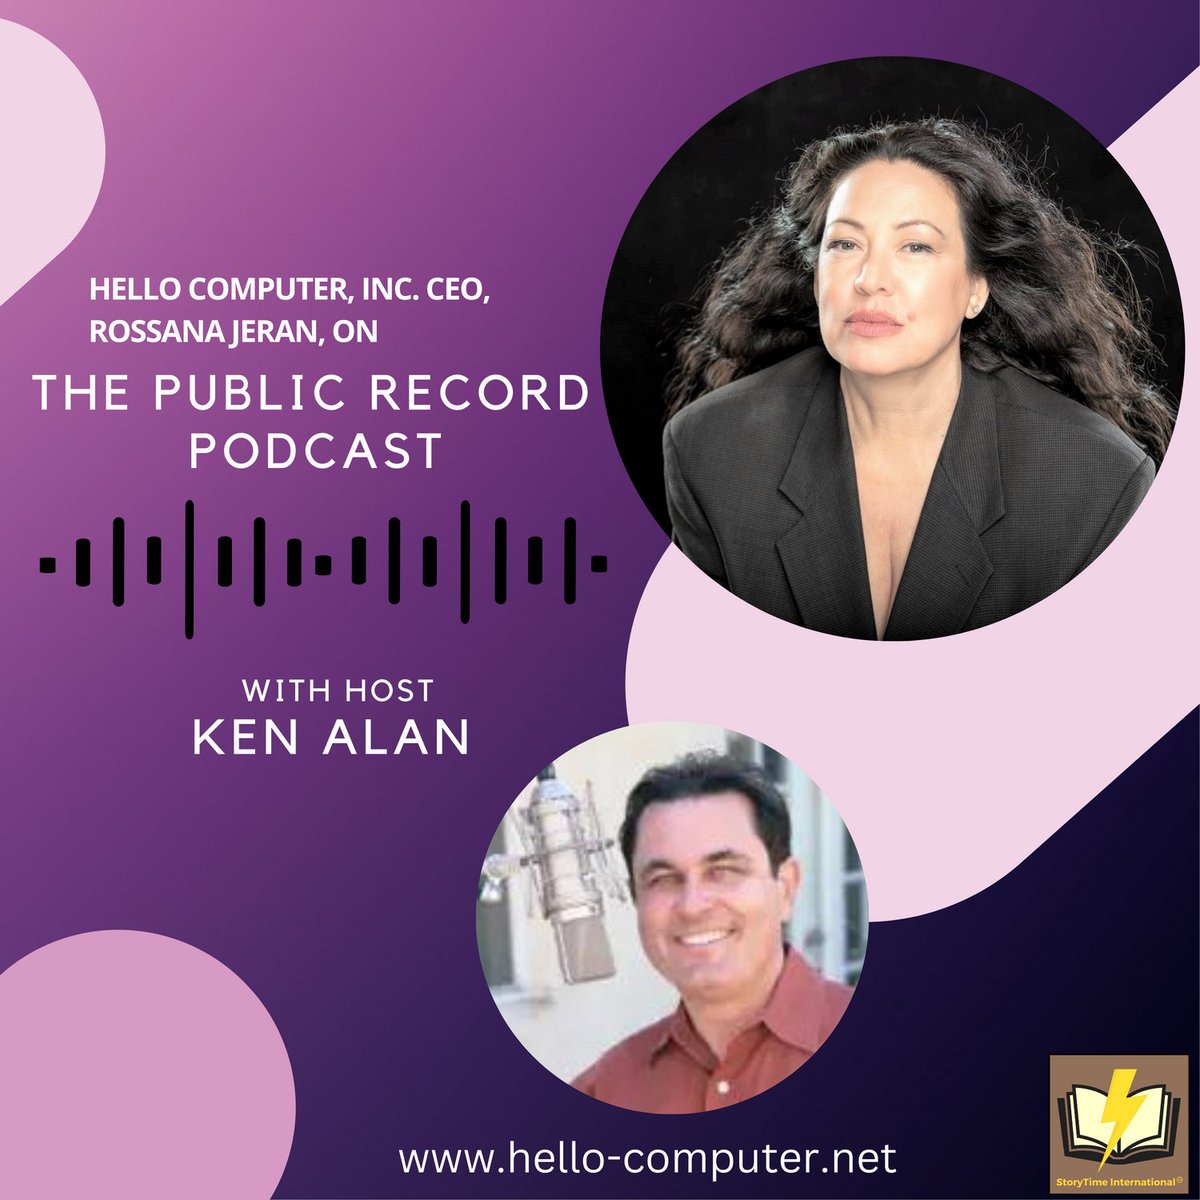 Join the Conversation with Hello Computer, Inc., CEO Rossana Jeran, Ken Alan of The Public Record Podcast, and the VP of Innovation @CVEPartnership Laura James!

🎧 Listen Now: rb.gy/thjei3

#hellocomputer #edtech #podcast #coachellavalley #cvep